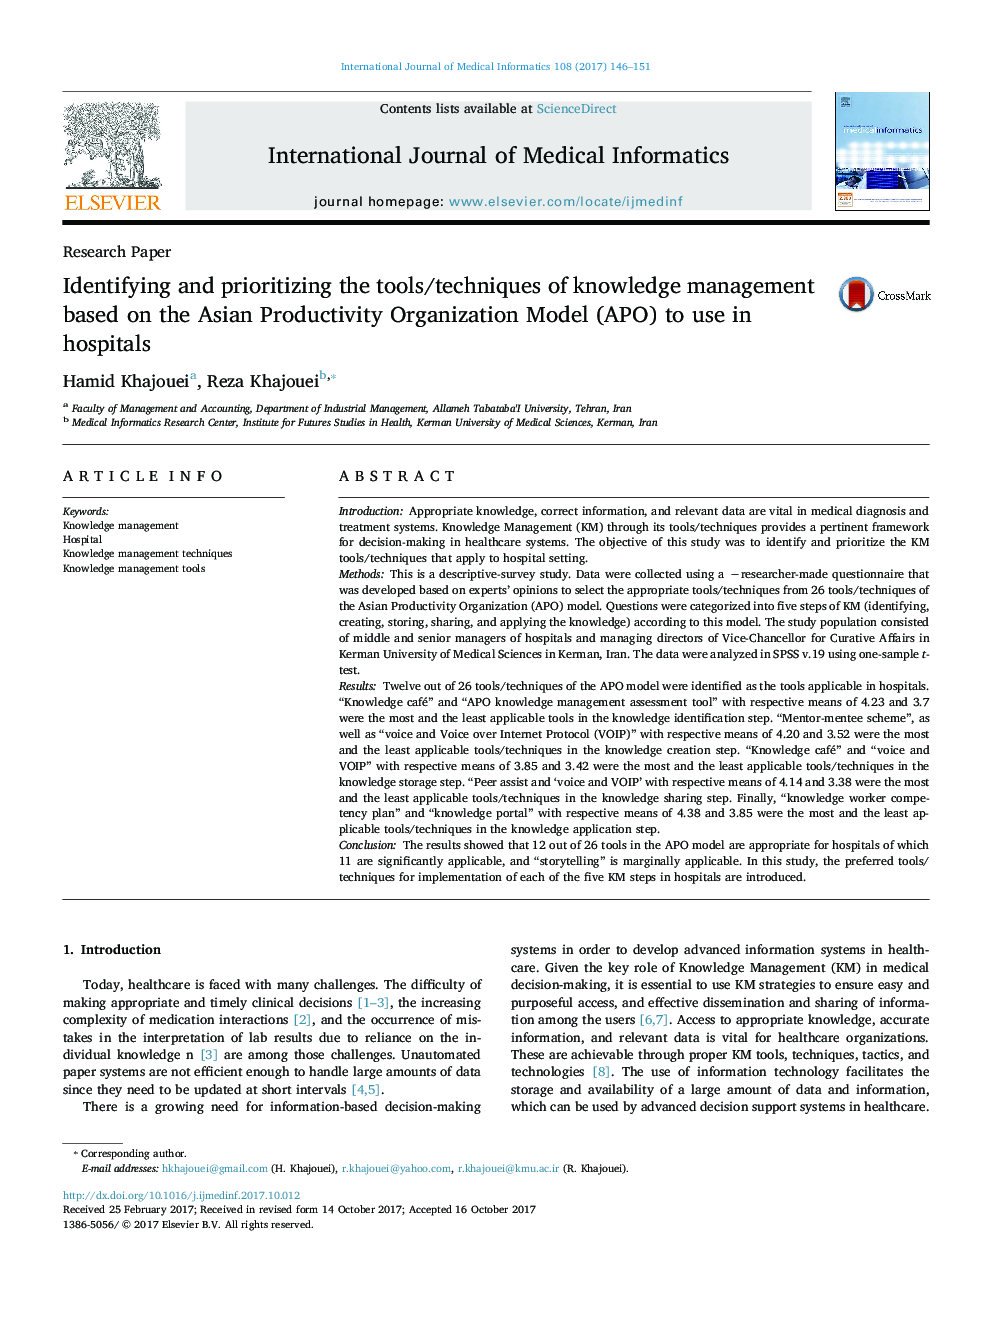 Identifying and prioritizing the tools/techniques of knowledge management based on the Asian Productivity Organization Model (APO) to use in hospitals